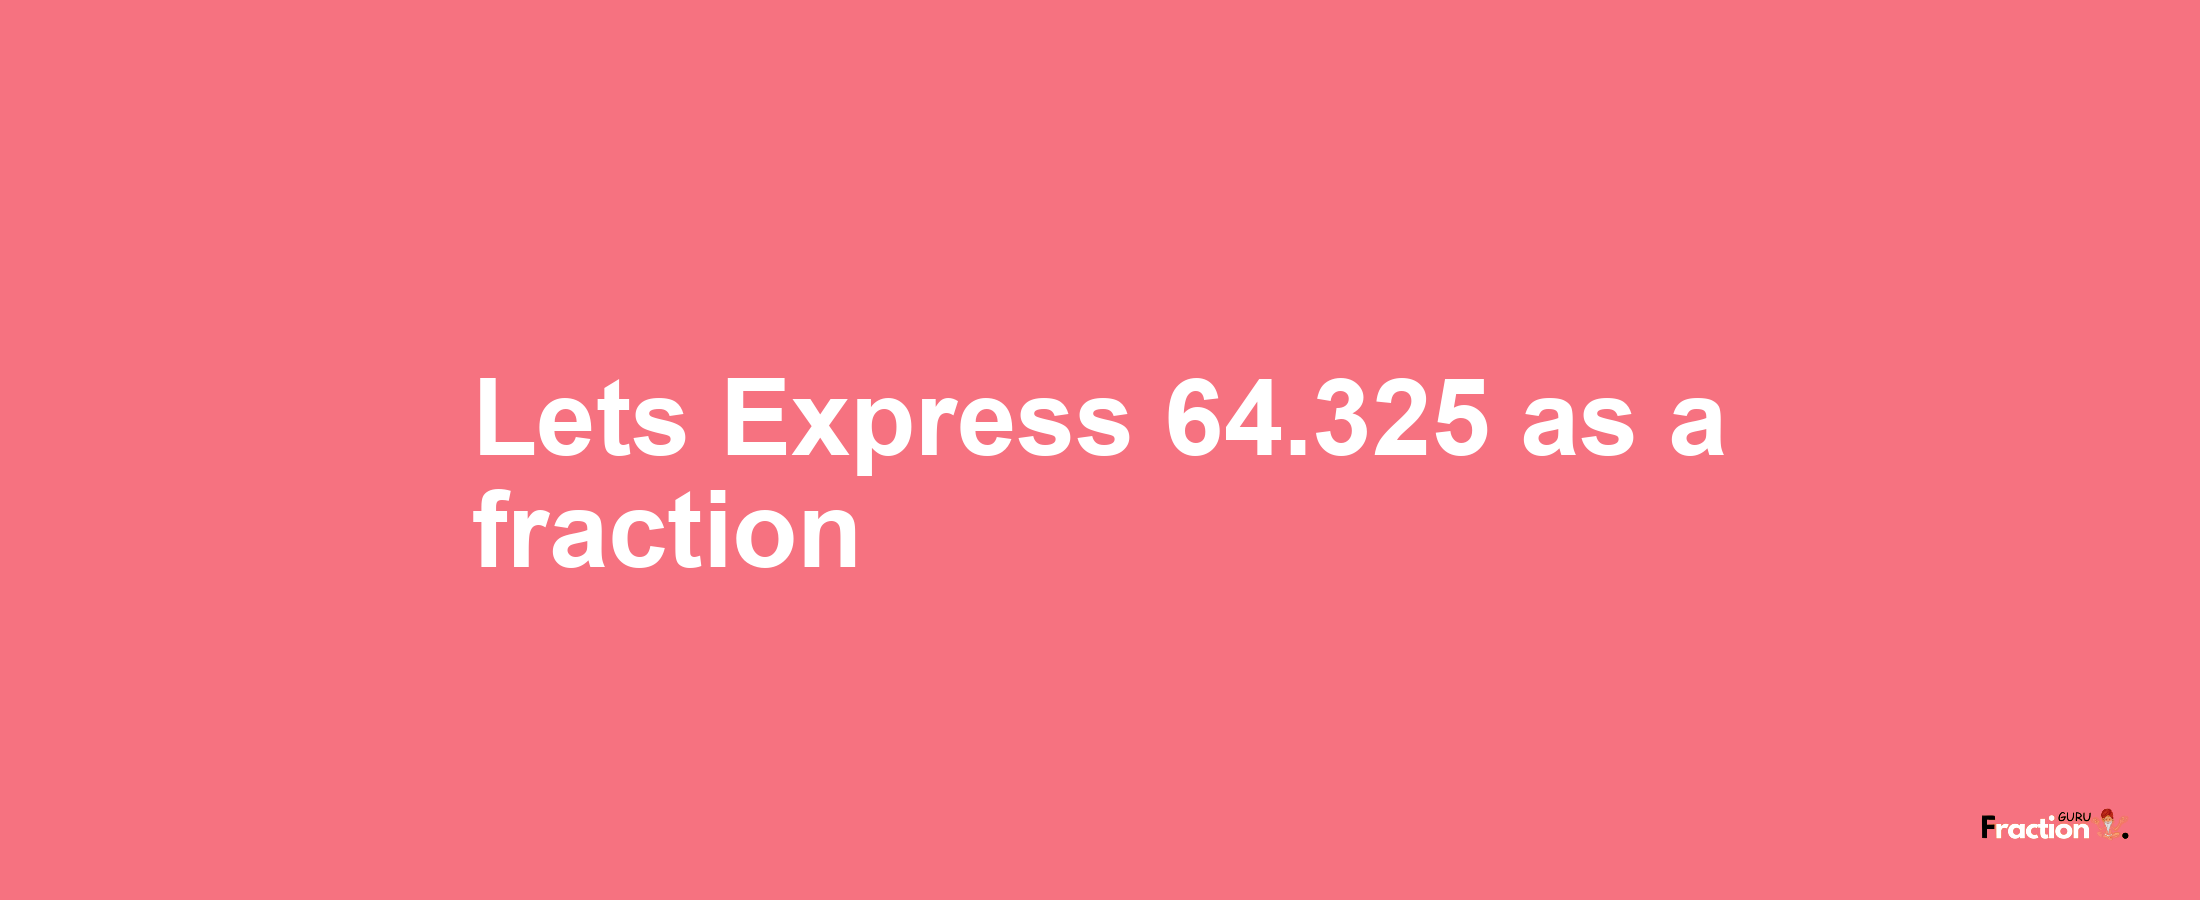 Lets Express 64.325 as afraction